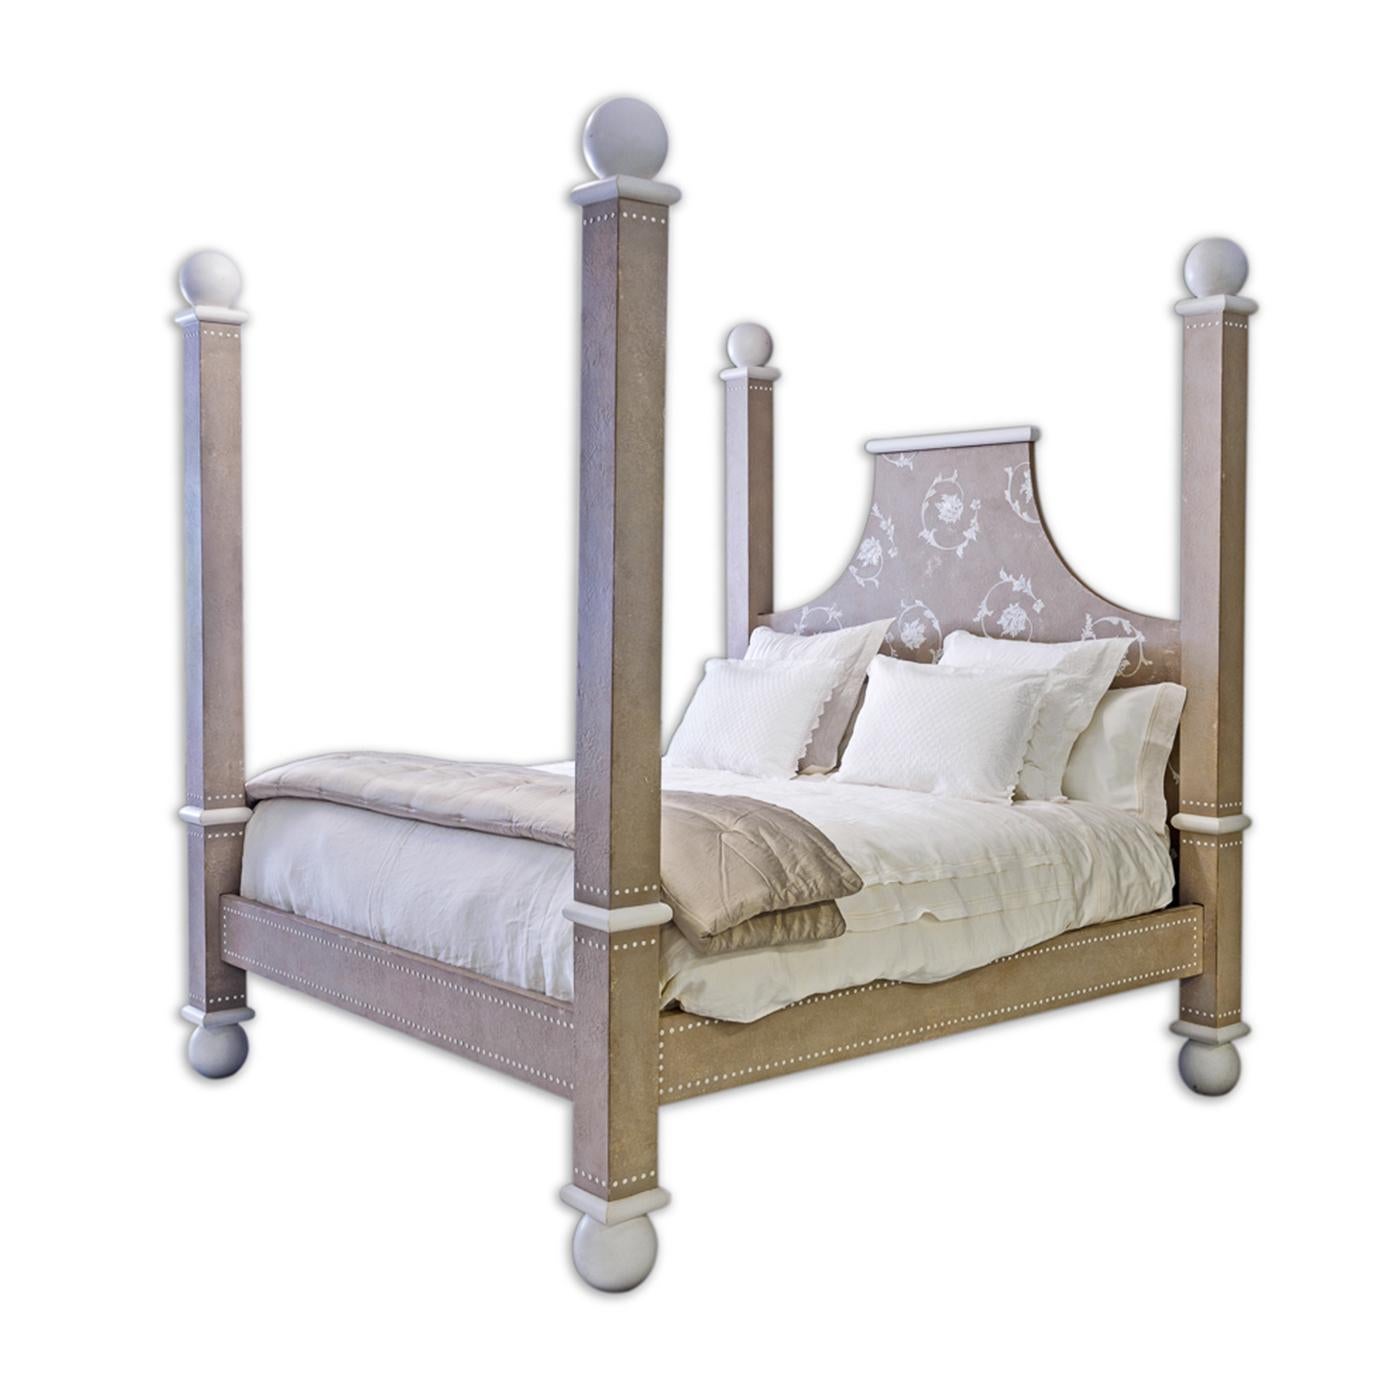 Charming and stylish, the custom made Star Jasmine Bed is entirely hand crafted and is beautifully decorated using Venetian style techniques. Colors and decorations can be applied according to the customer's requests in order to perfectly coordinate